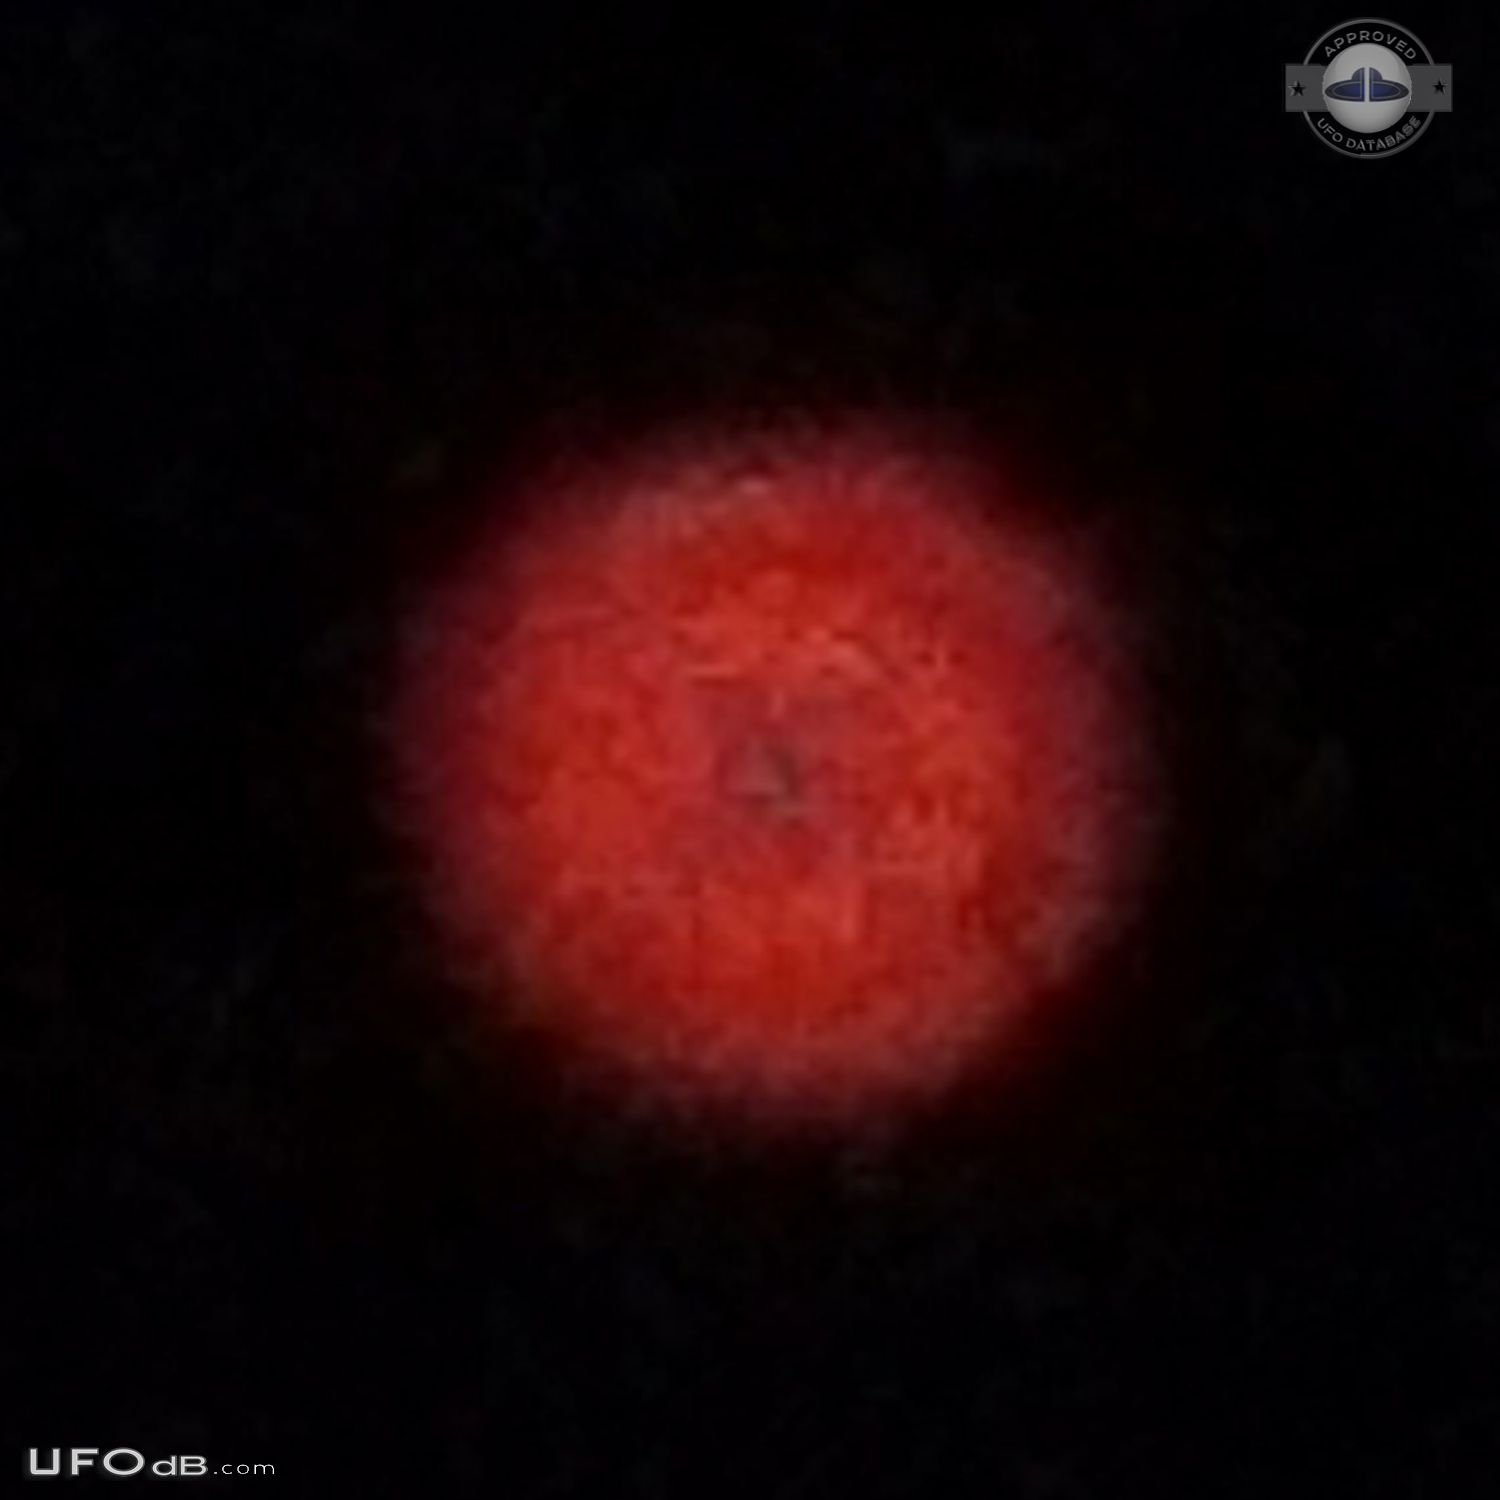 Orange silent ball UFO that moved quickly - Oadby, Leicestershire 2014 UFO Picture #666-5